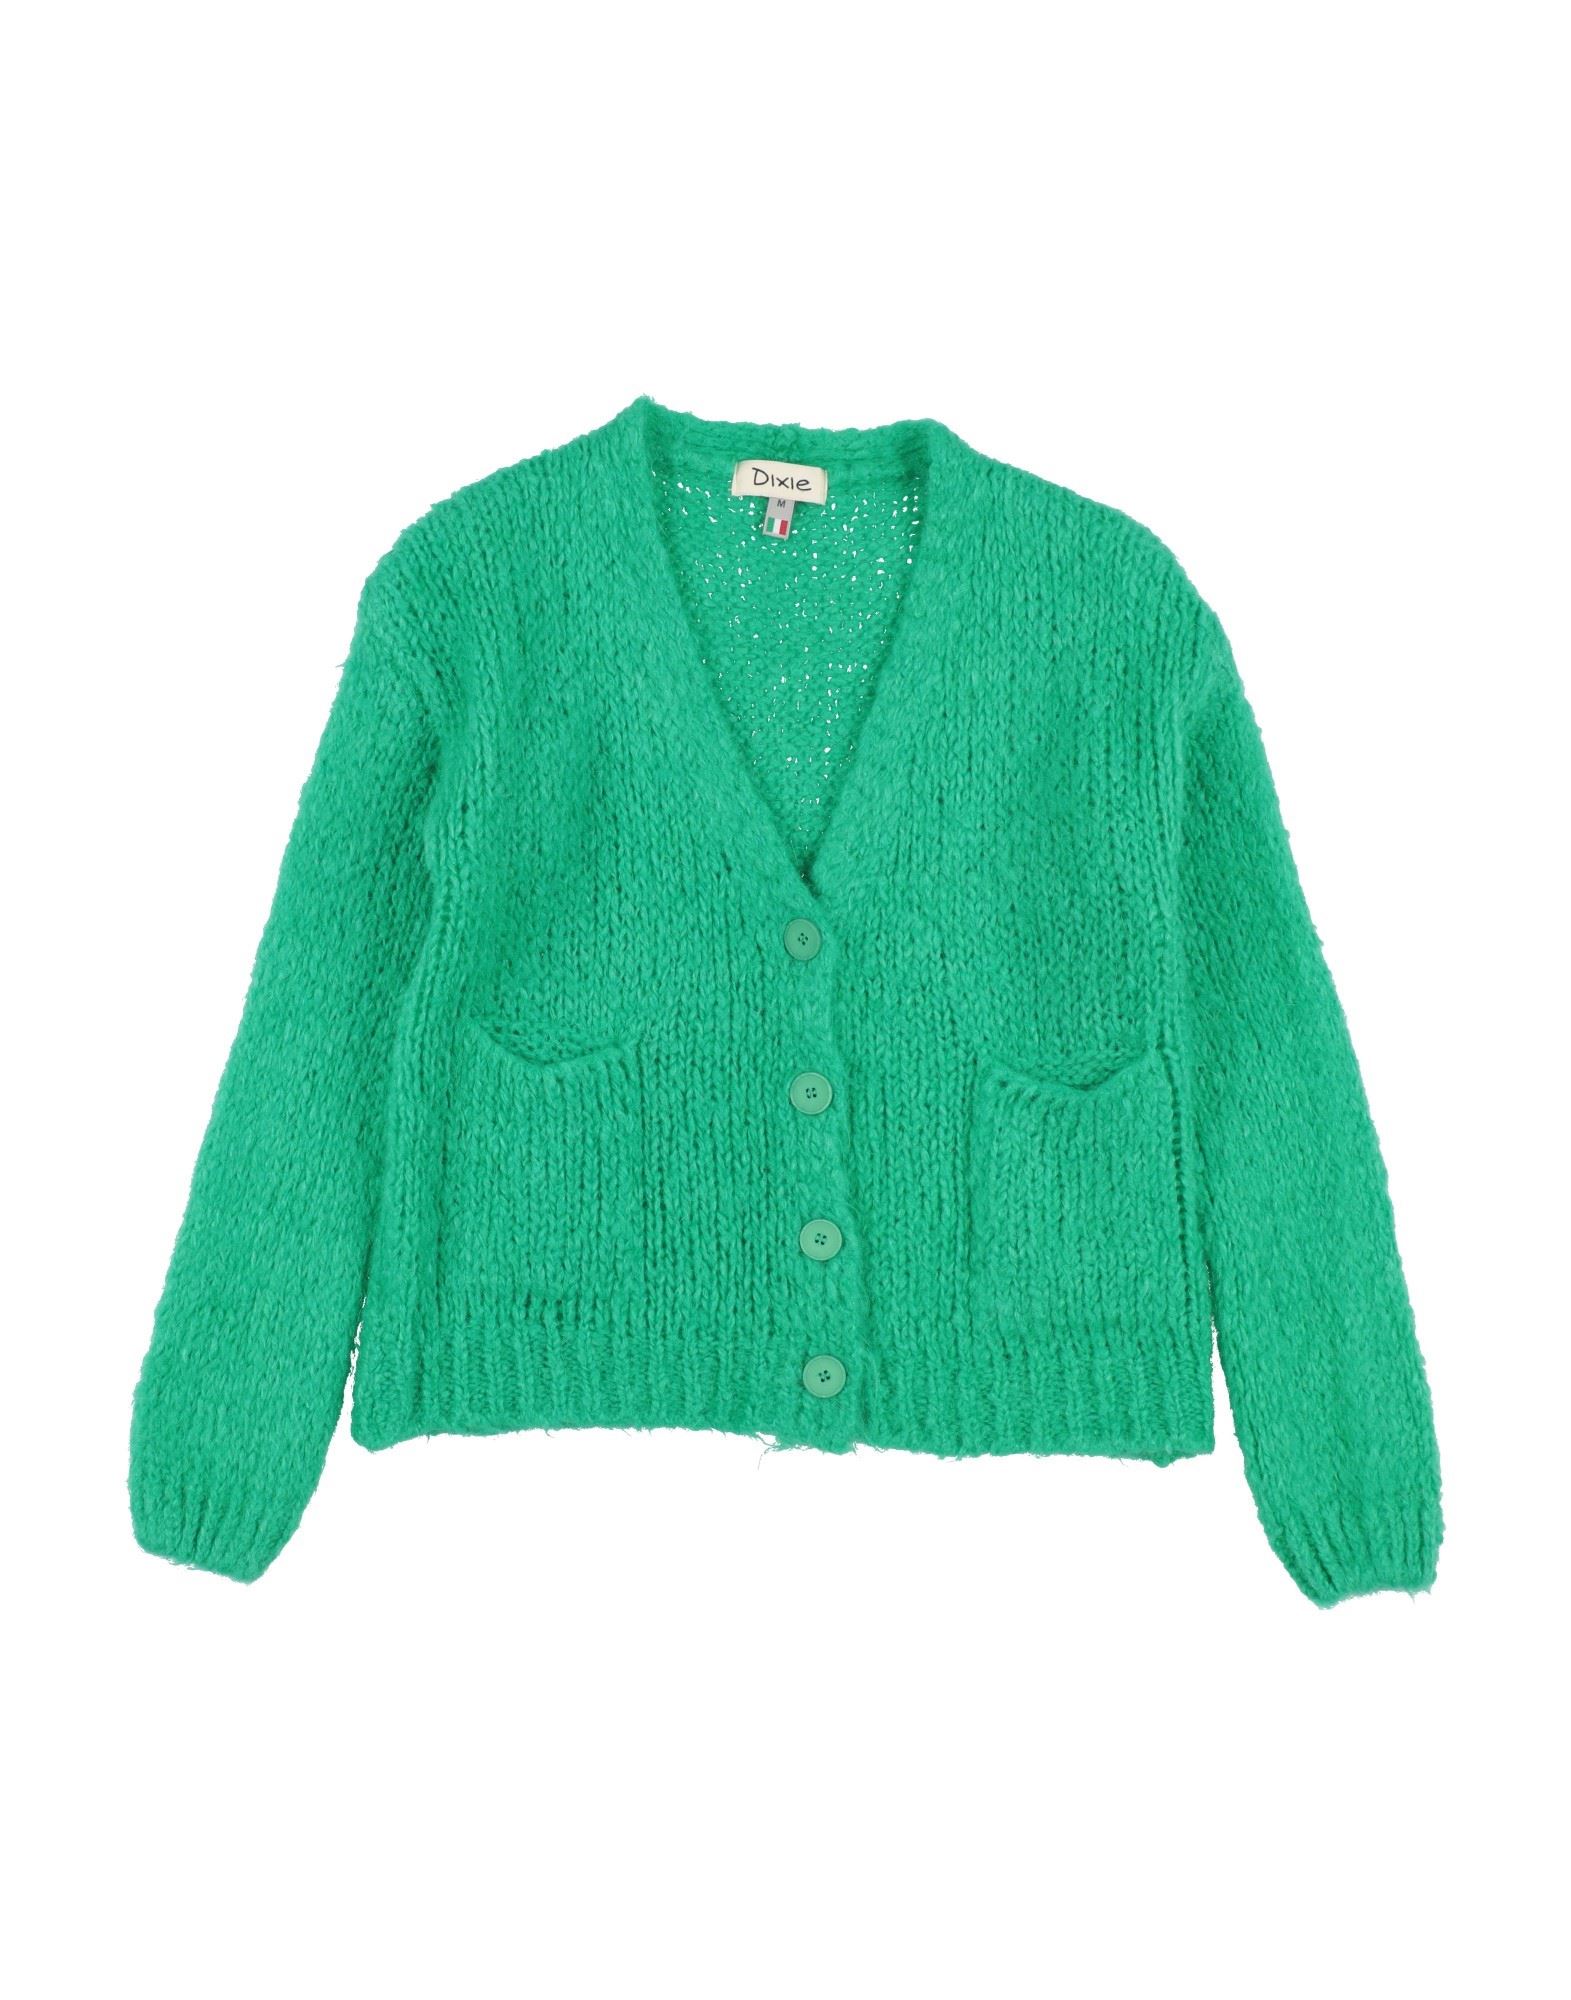 Dixie Kids' Cardigans In Green